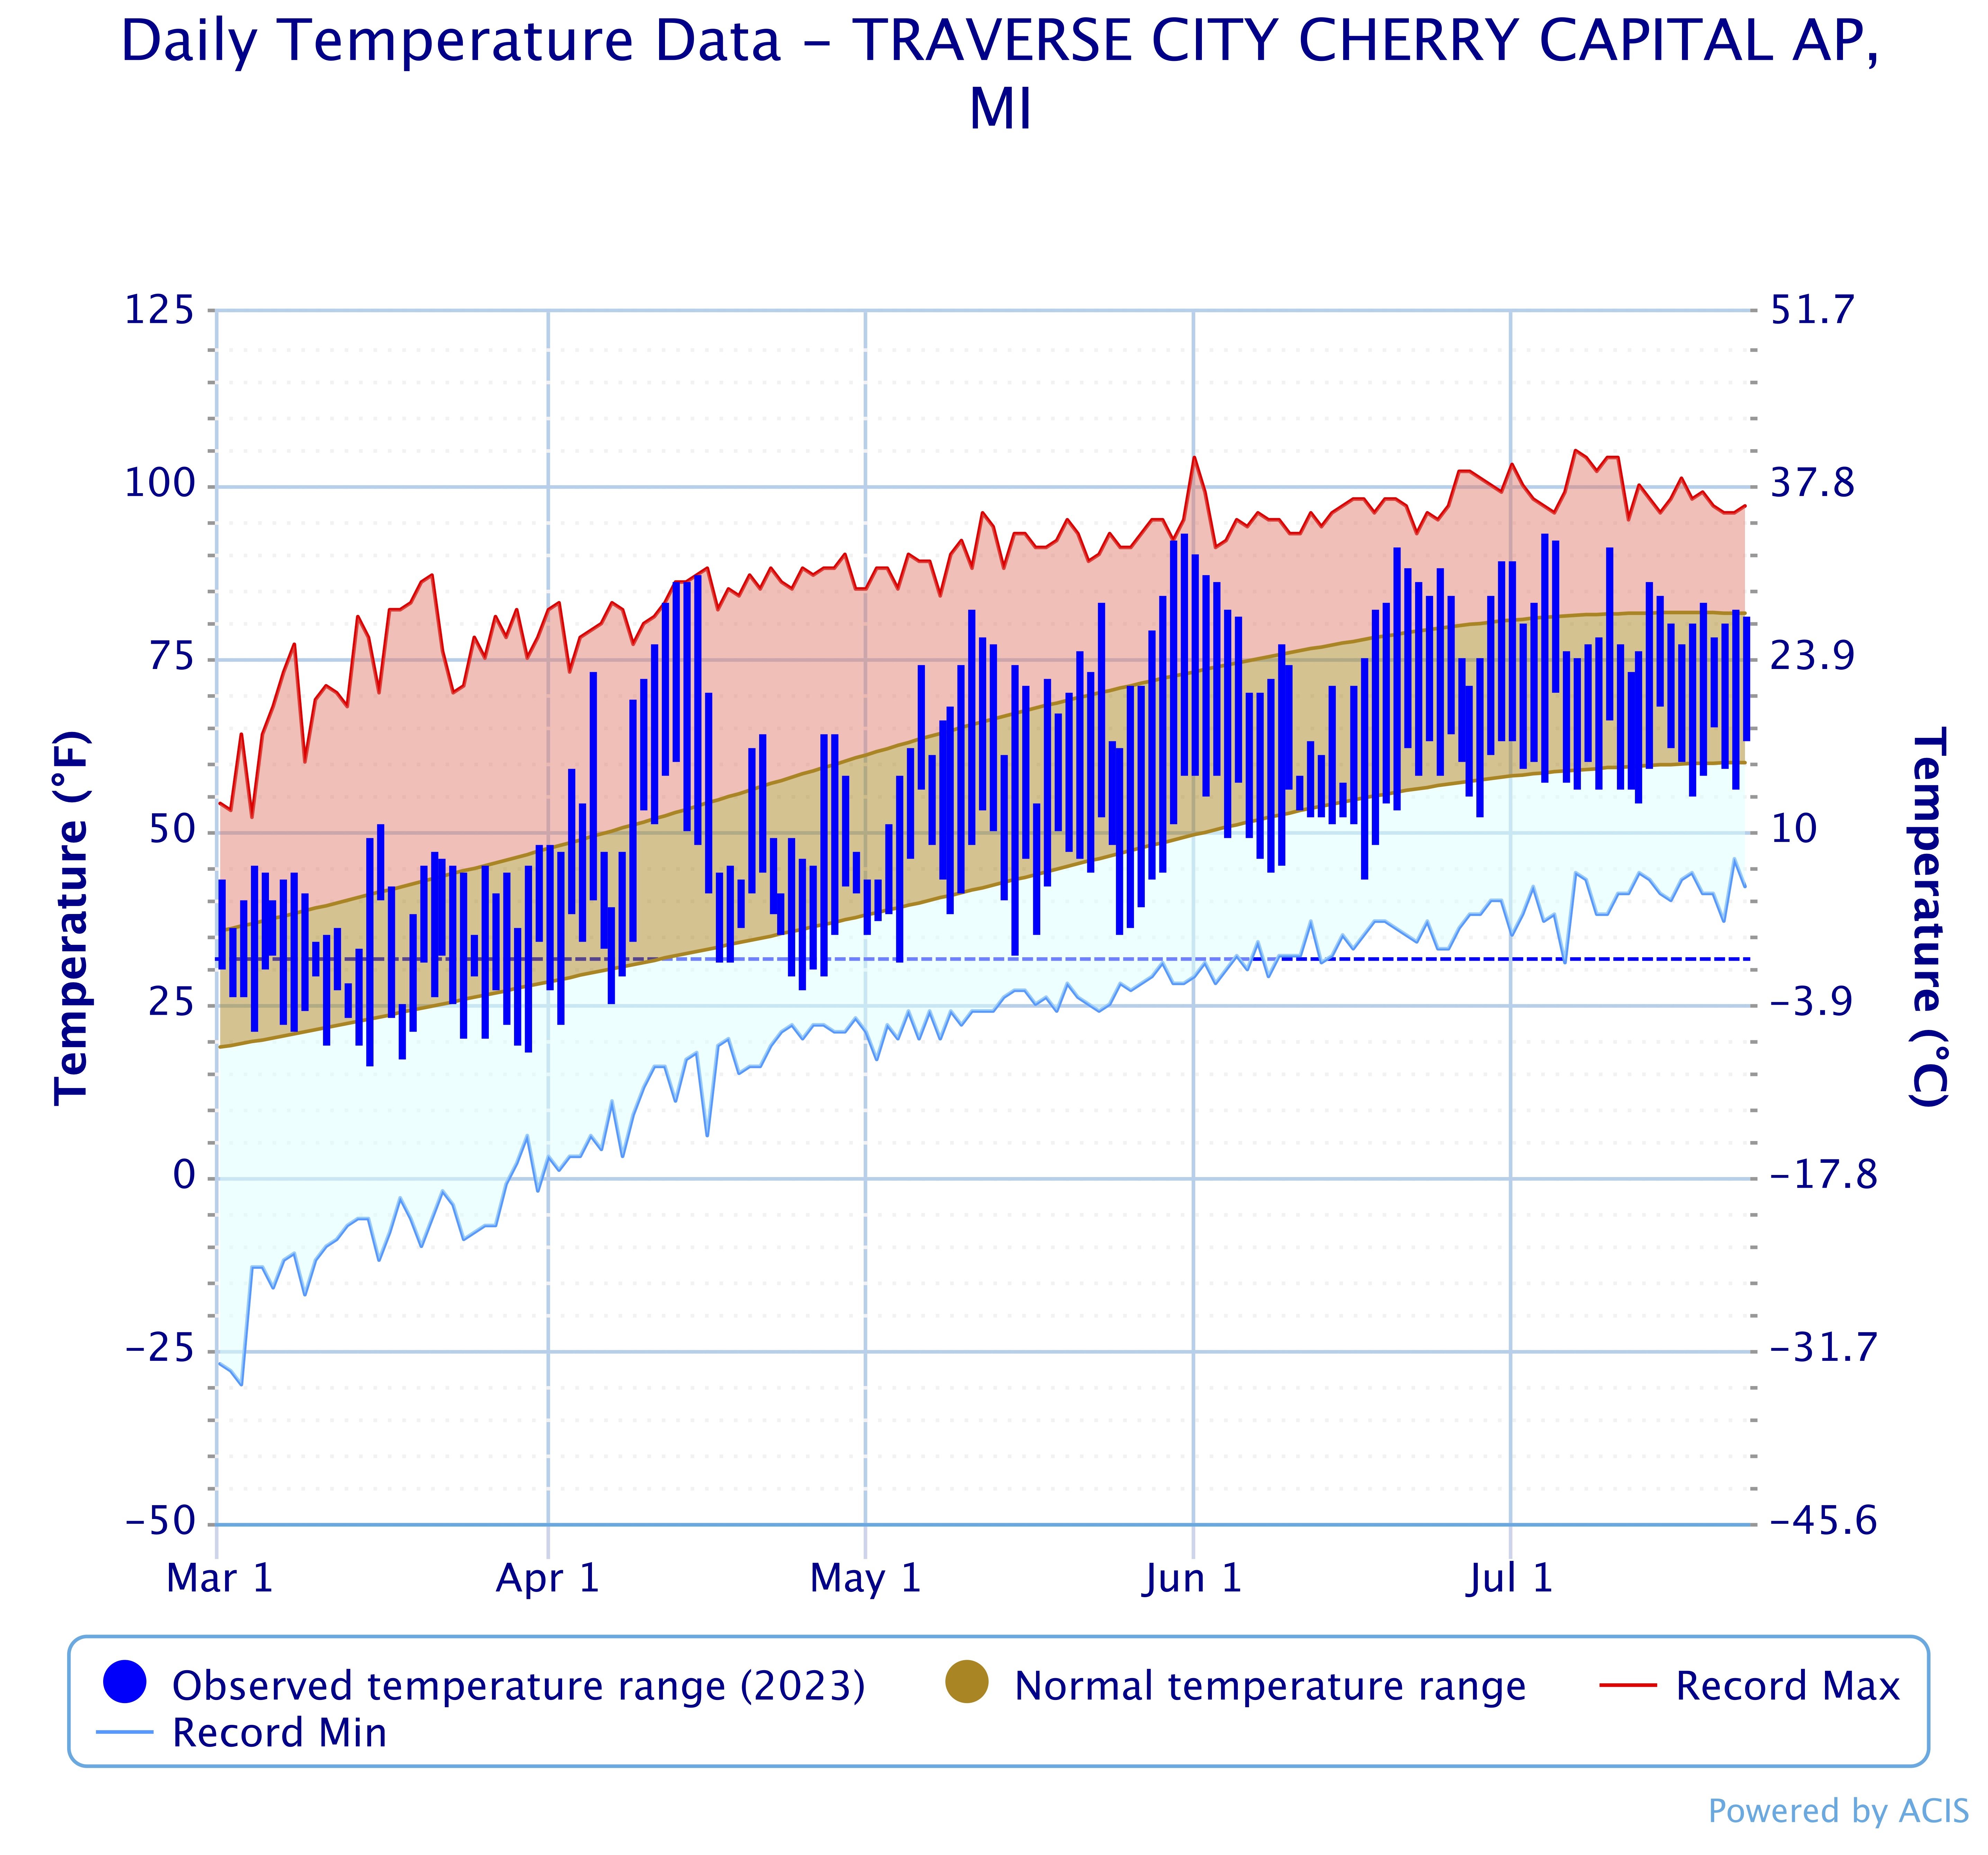 Daily temperature chart from March 1-July 18, 2023 with average low and high temperatures.